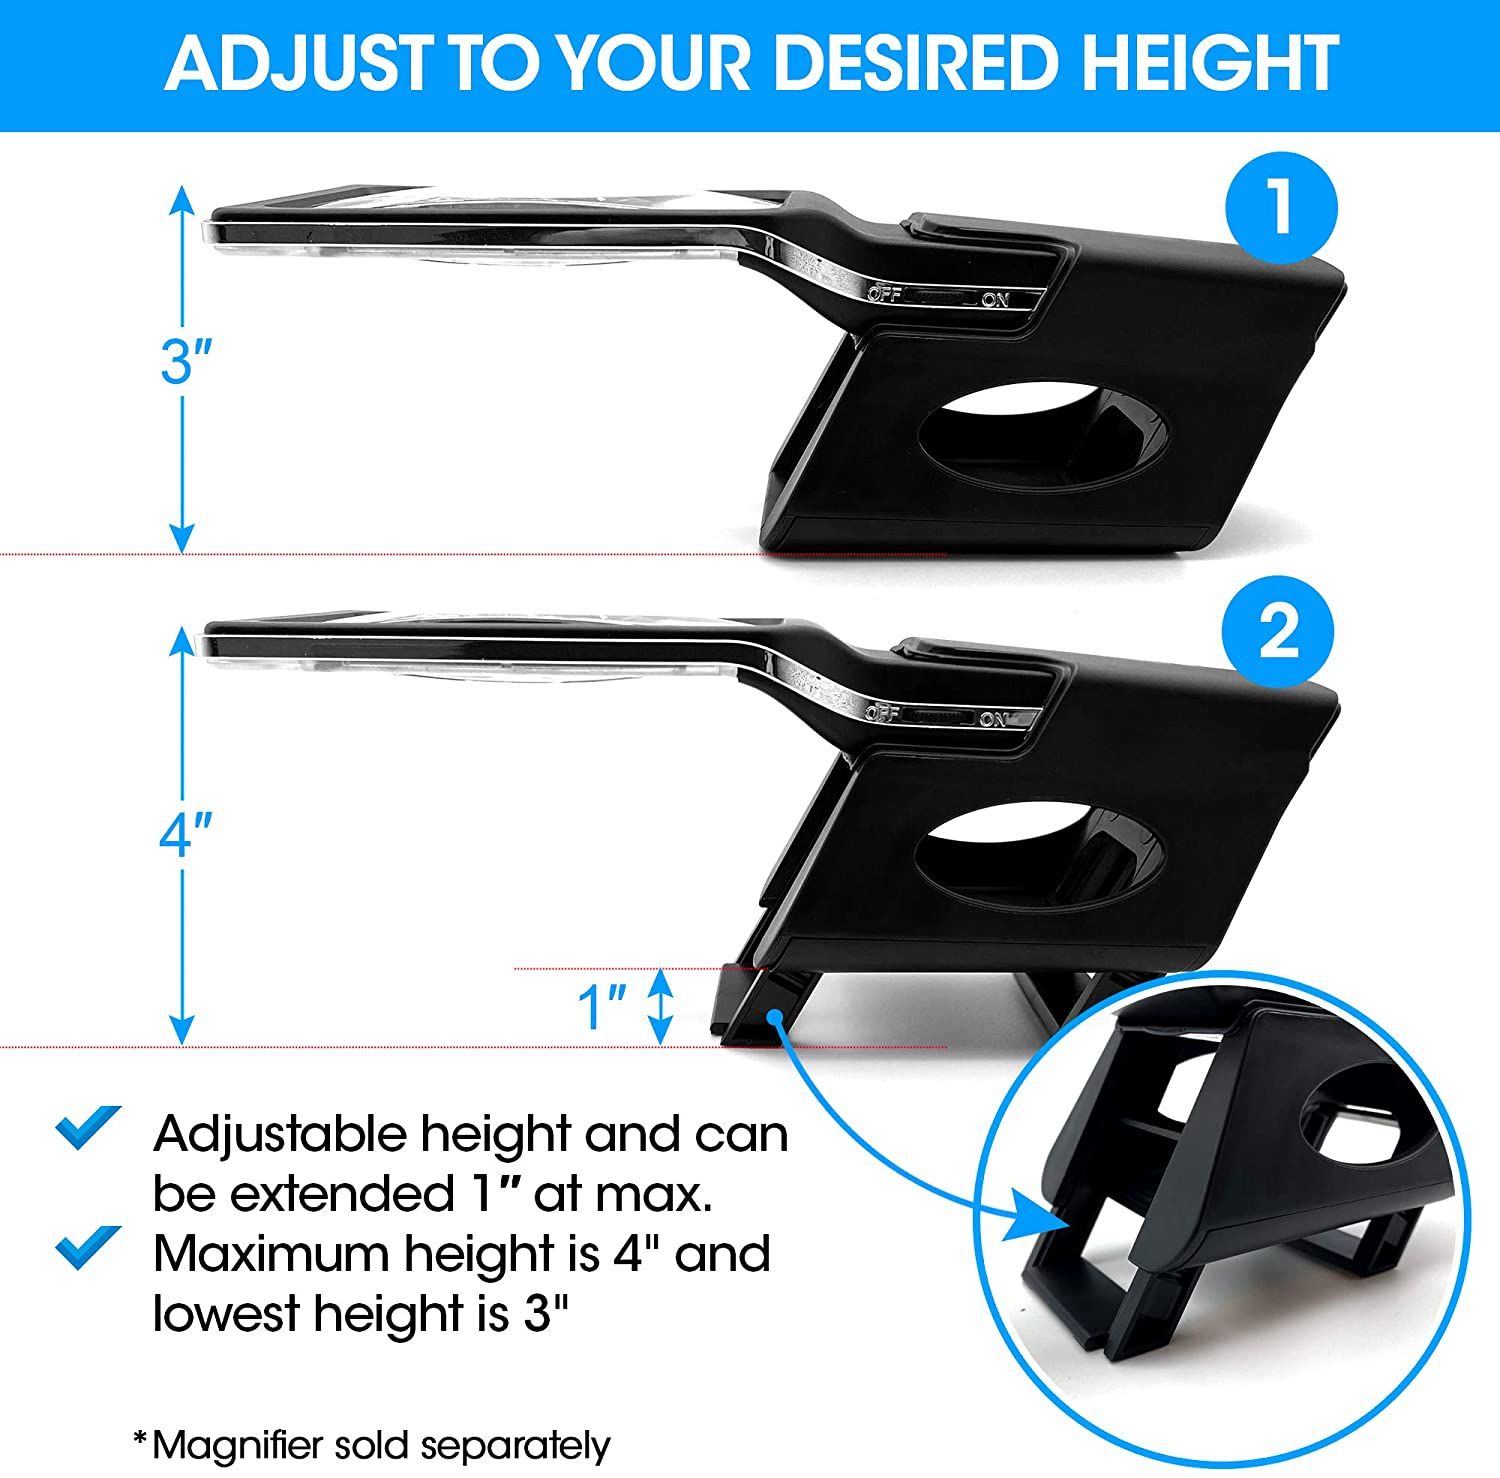 sliding legs to adjust height of the stand